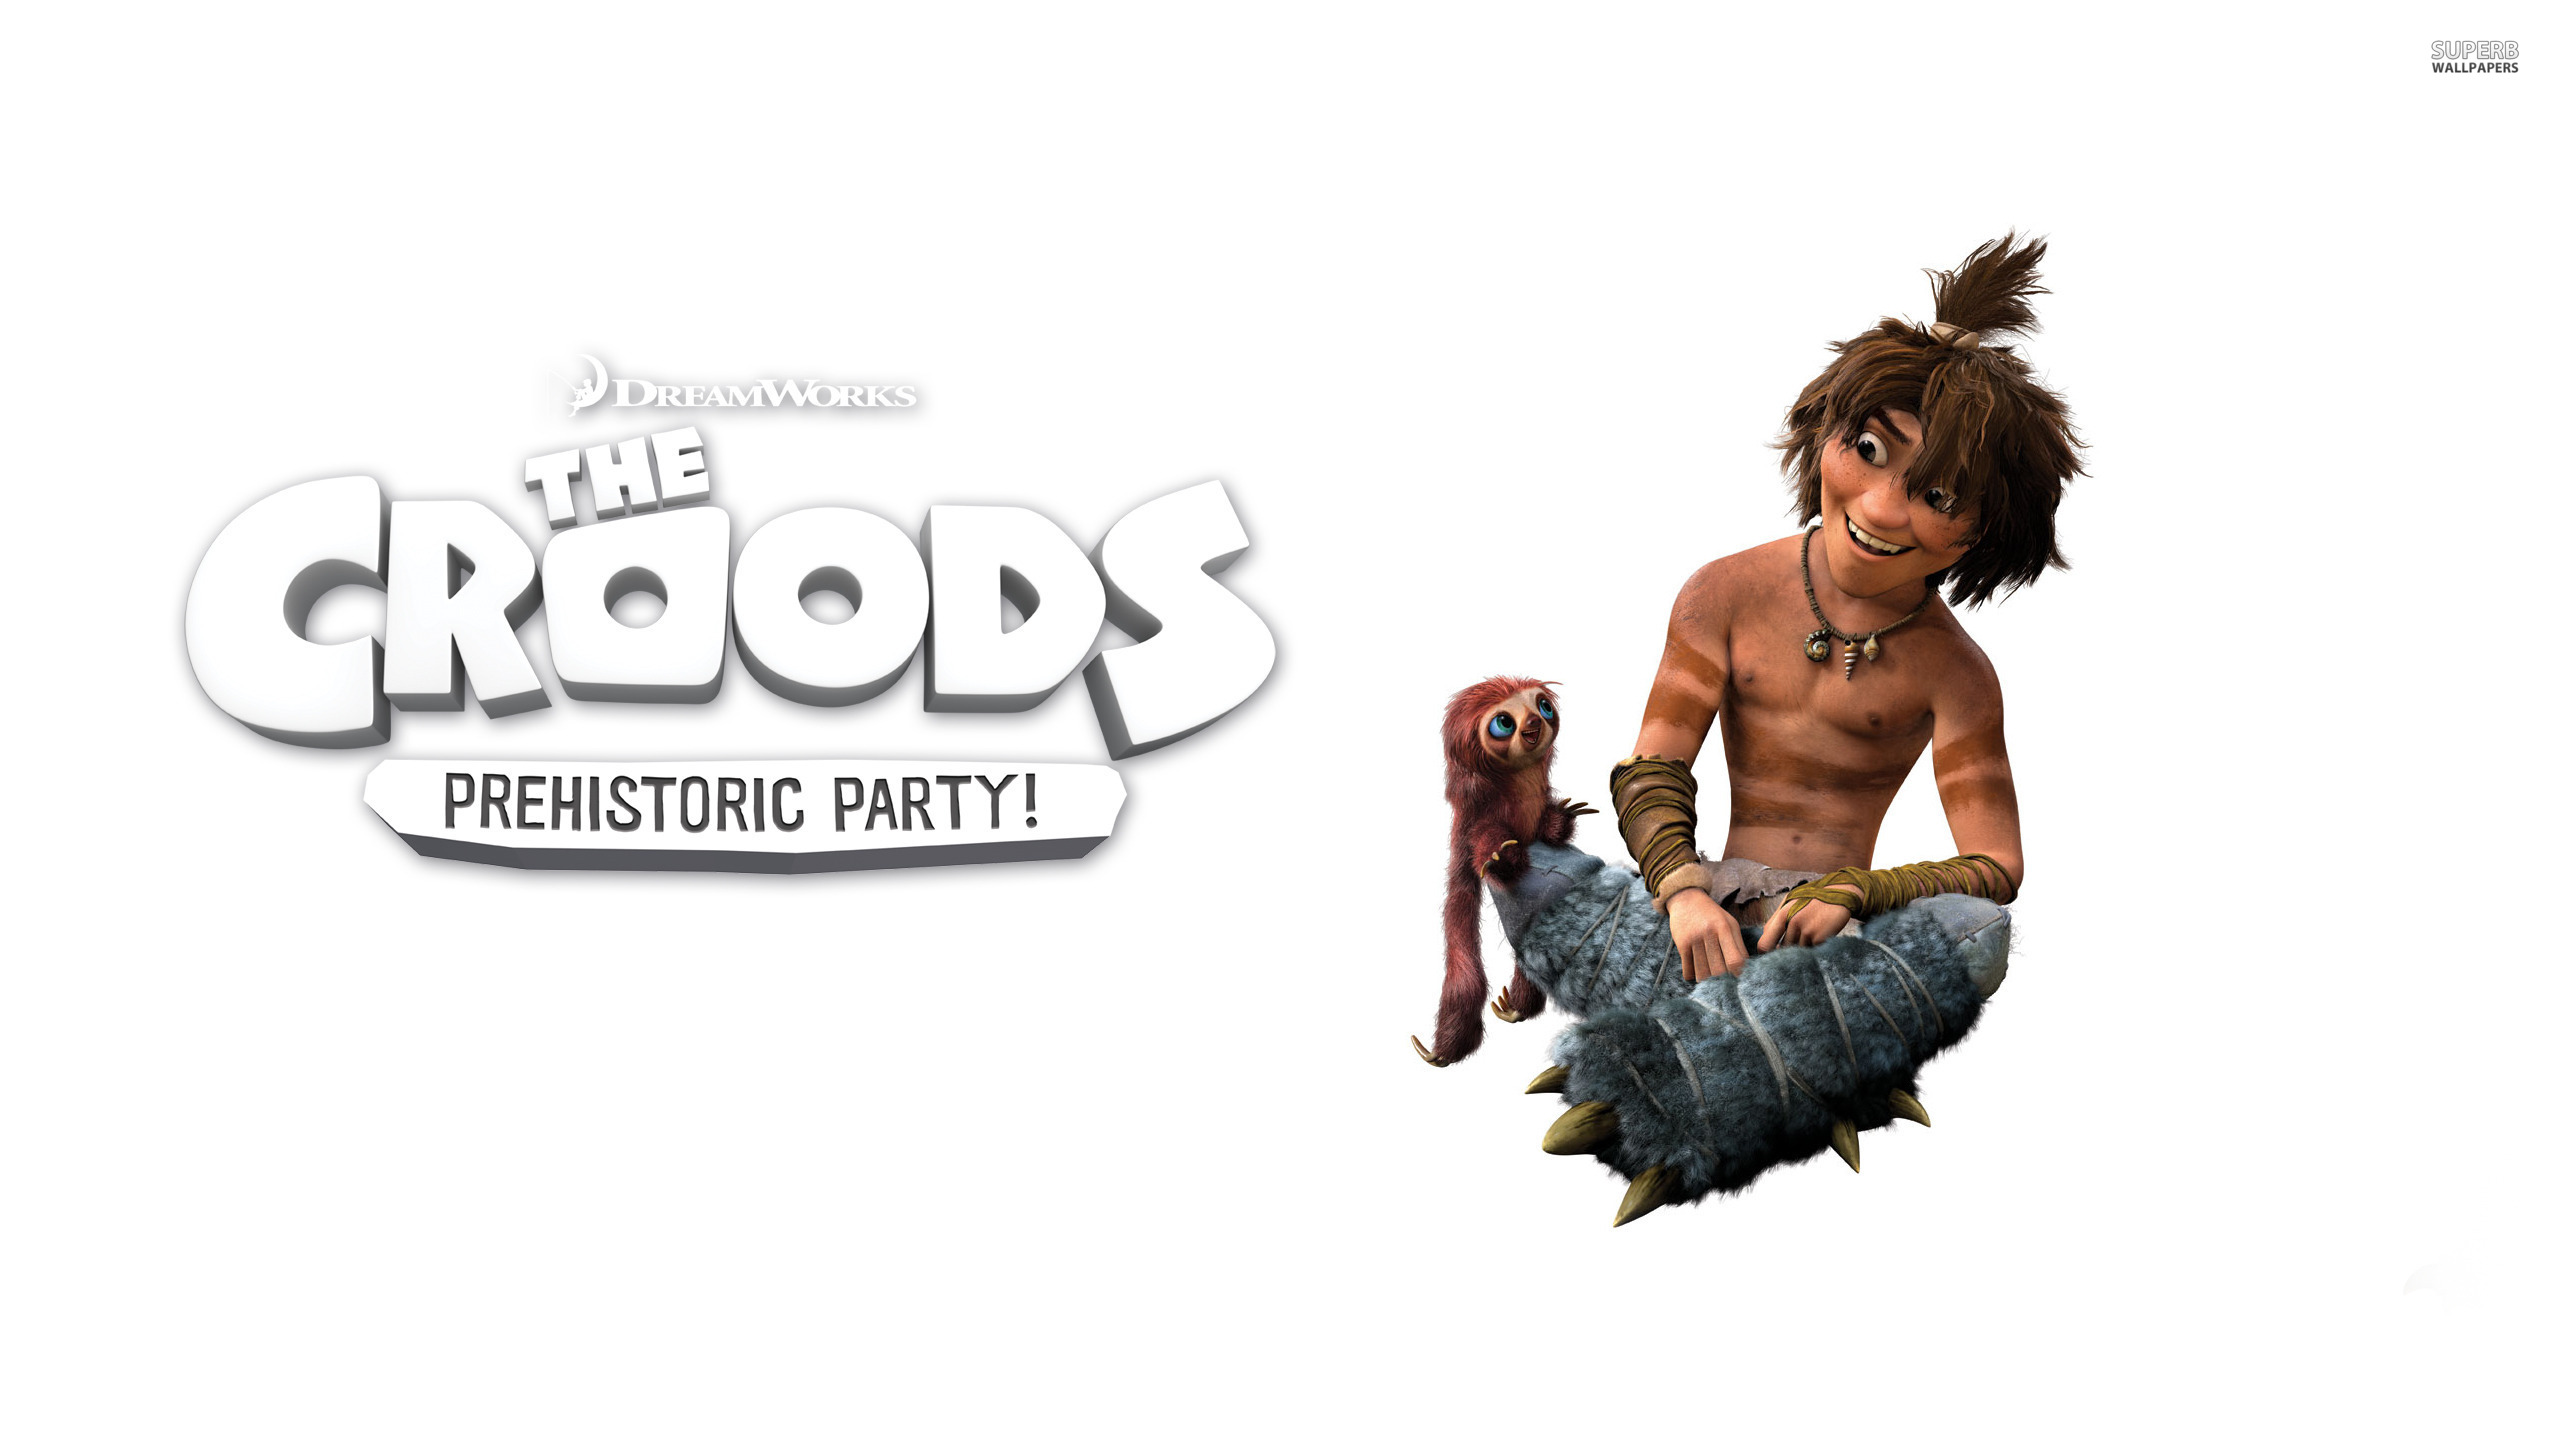 movie, the croods, guy (the croods)